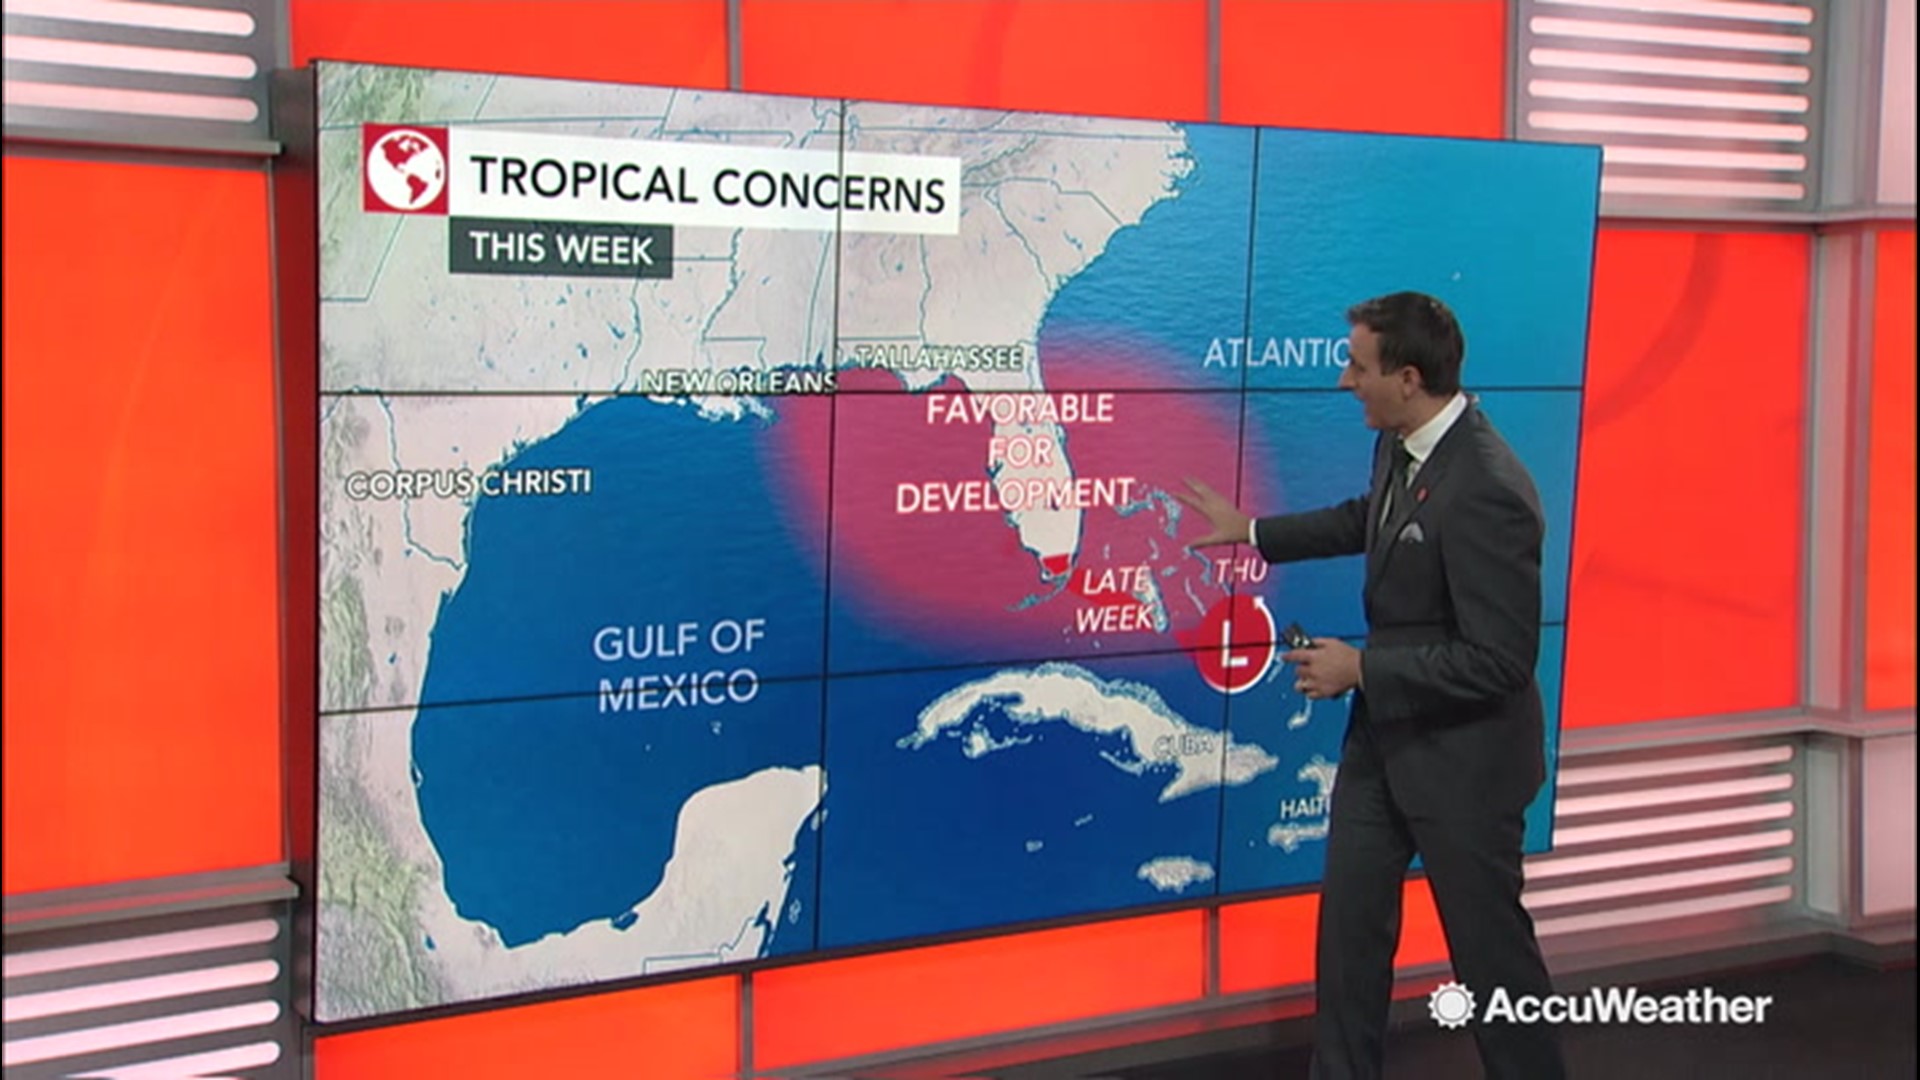 Concern is growing for a new tropical system that is expected to form and impact parts of the Bahamas and U.S. East Coast in the coming days. AccuWeather Broadcast Meteorologist Justin Povick has the details.